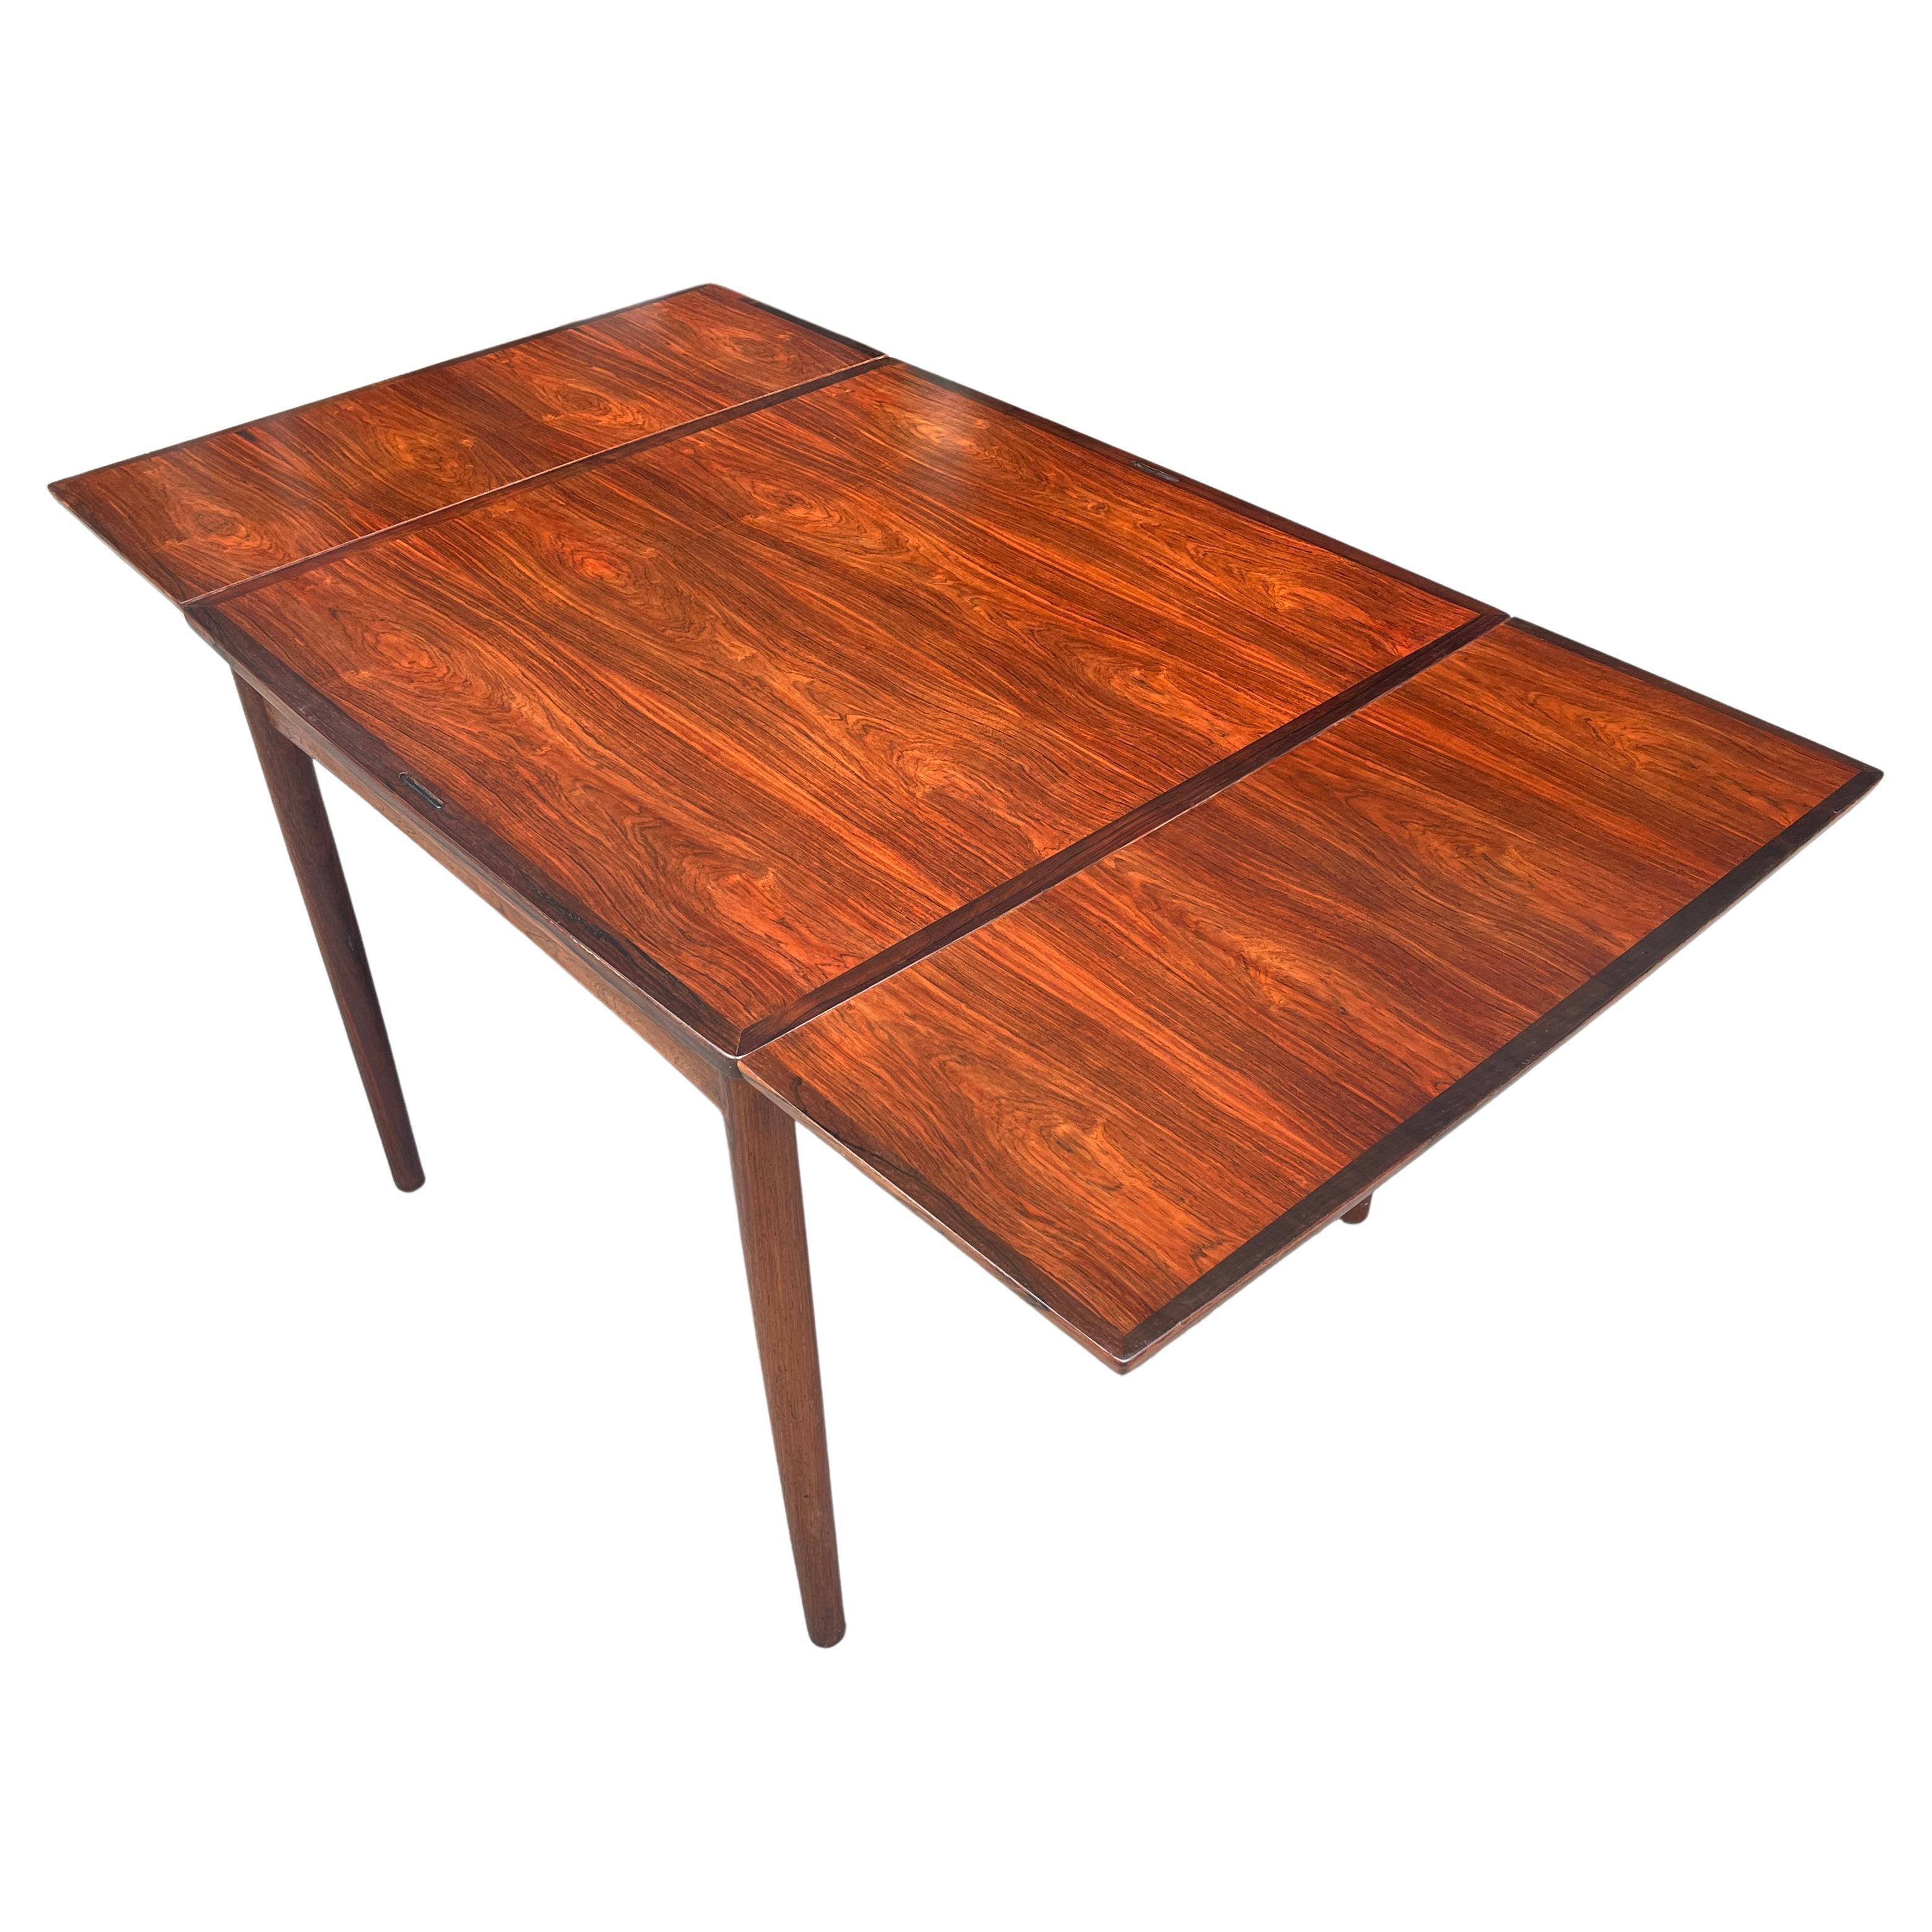 Danish Rosewood Dining Table Poul Hundevad